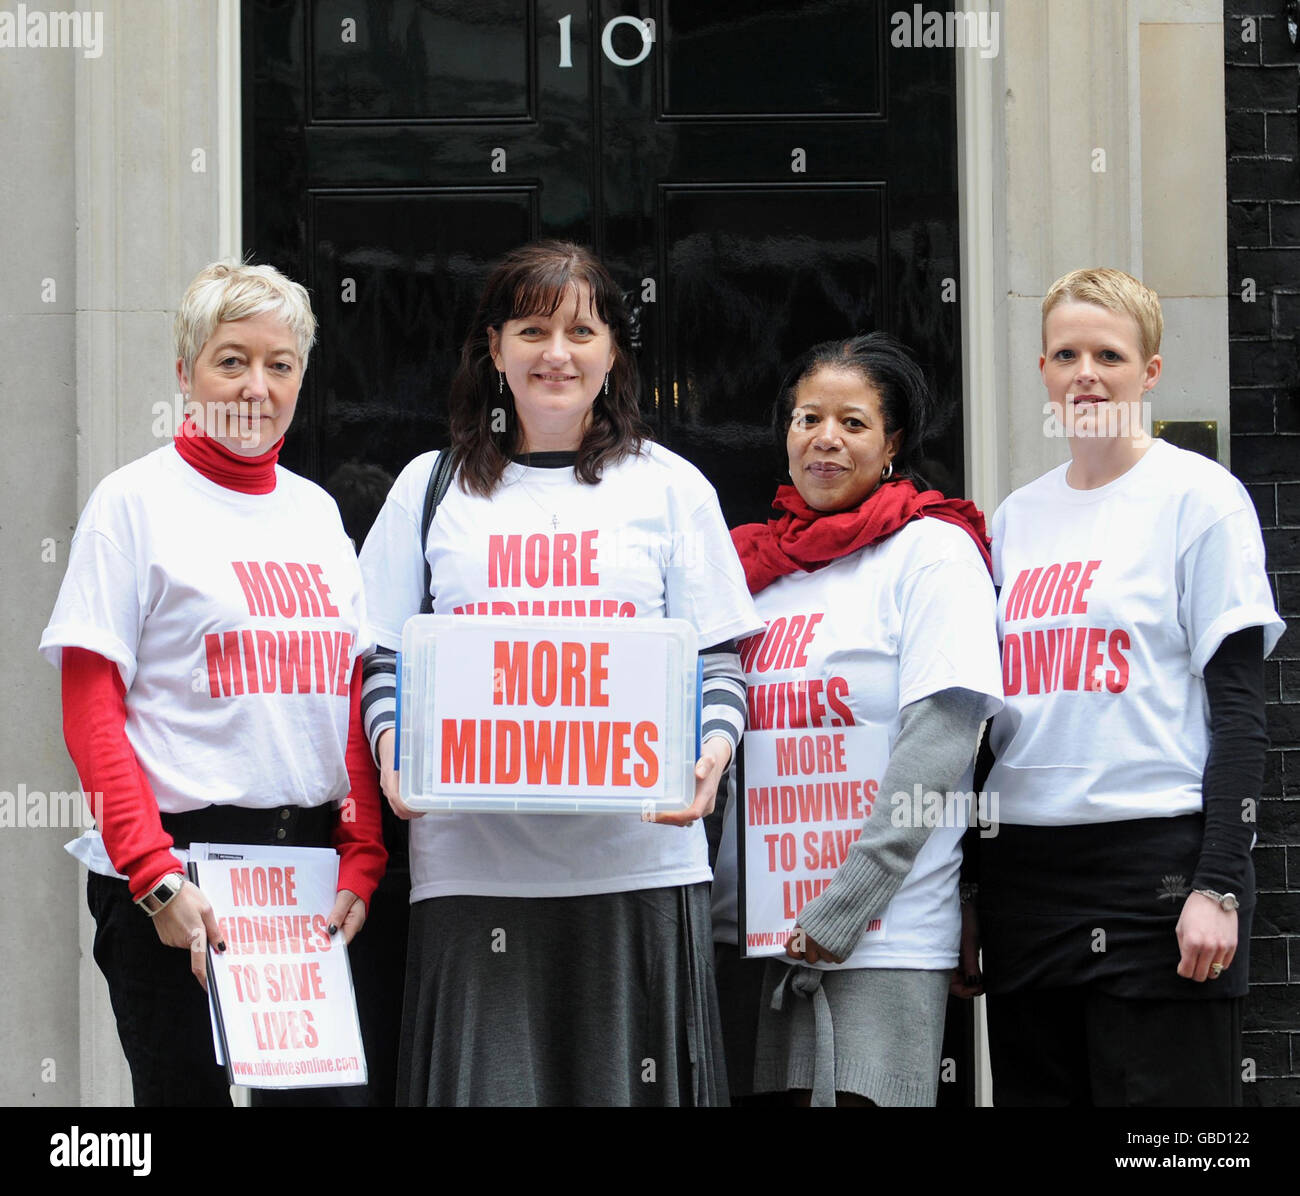 (left to right) Midwives Catherine Parker-Littler, Dr Mary Steen, Diane Jones and mother Laura Miller deliver a petition, which is signed by 30,000 midwives, health professionals and parents, to Downing Street. The petition calls for an additional 10,000 midwives to be trained. It also wants every mother to have access to a qualified midwife throughout labour and a named midwife during pregnancy, birth and the postnatal period. Stock Photo